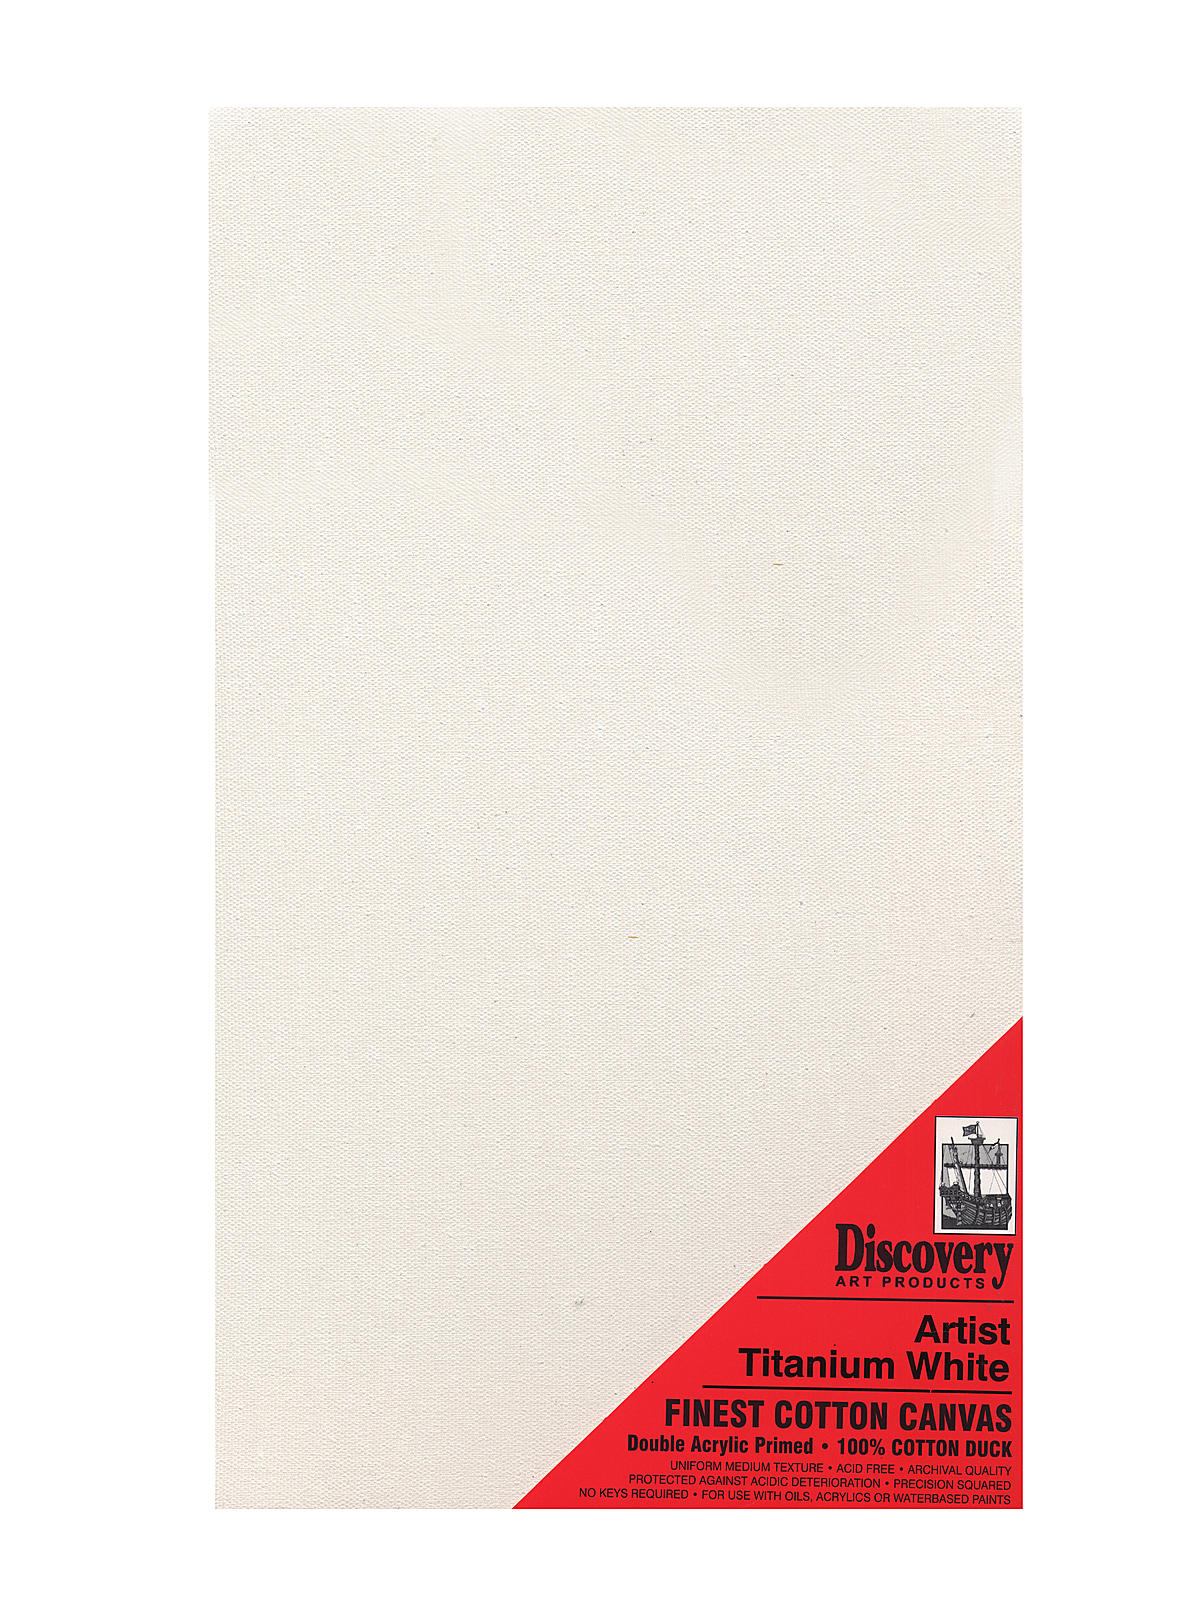 Finest Stretched Cotton Canvas White 12 In. X 24 In. Each